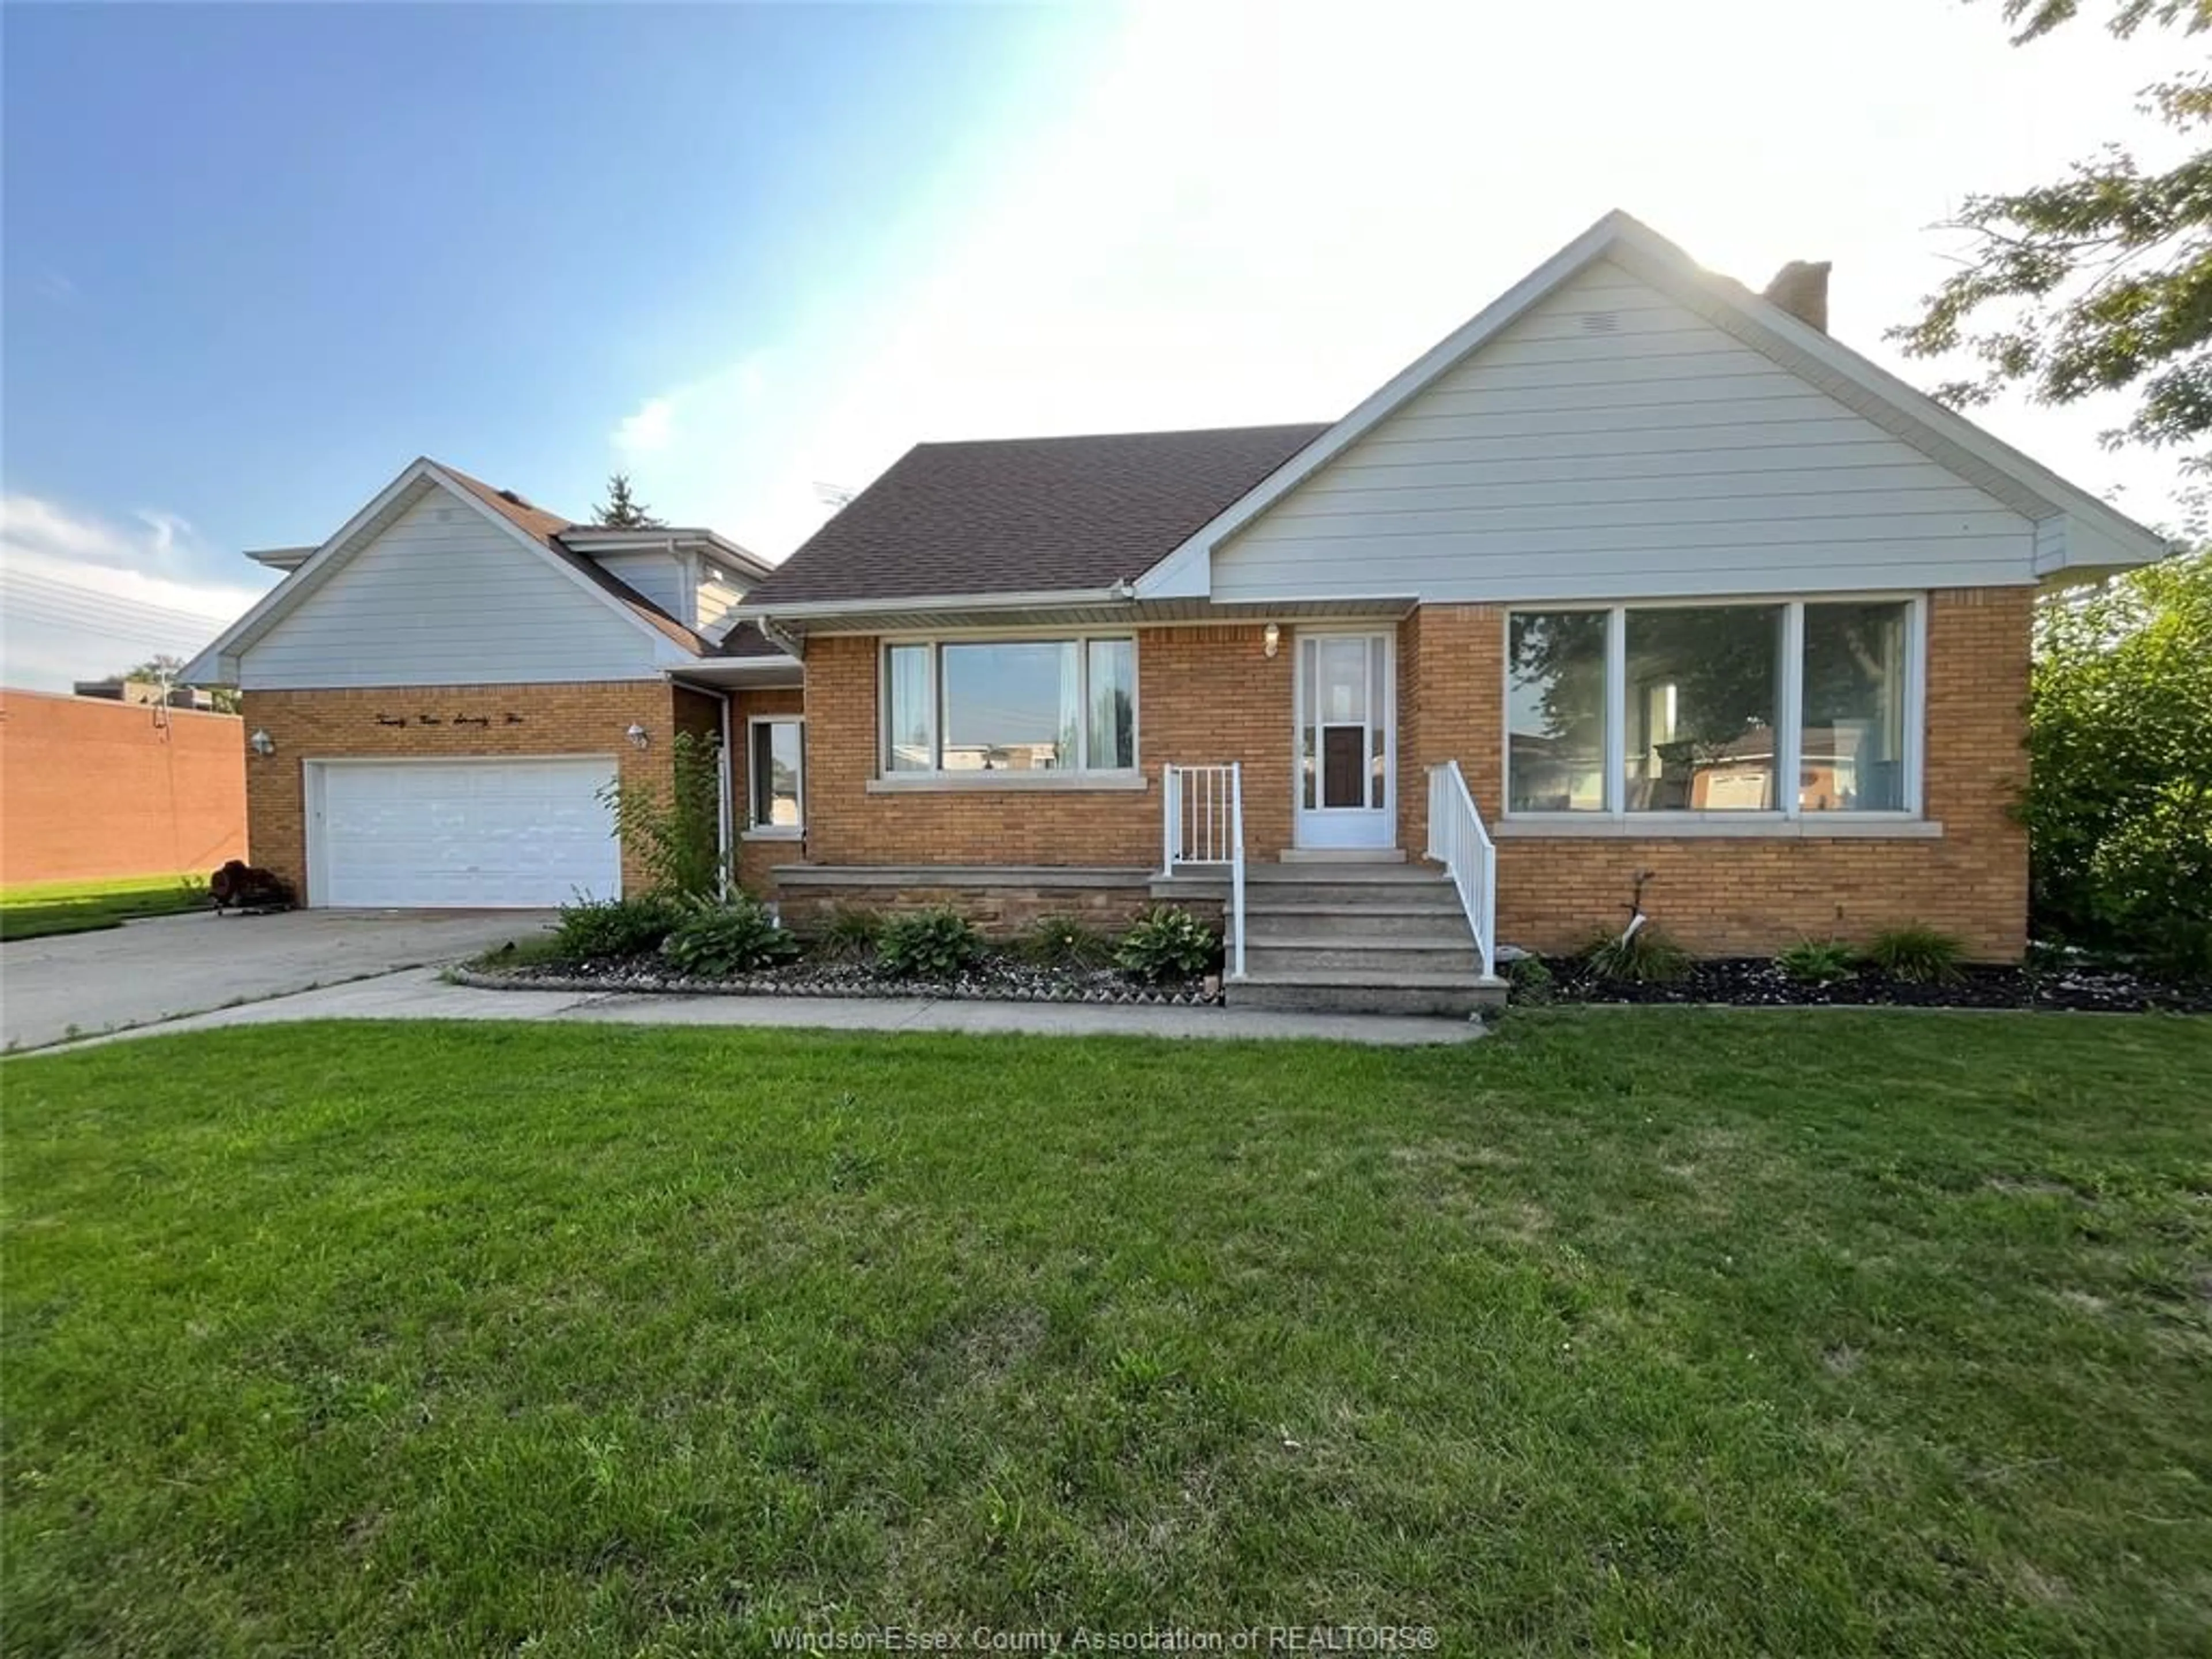 Frontside or backside of a home for 2975 CURRY Ave, Windsor Ontario N9E 2S9